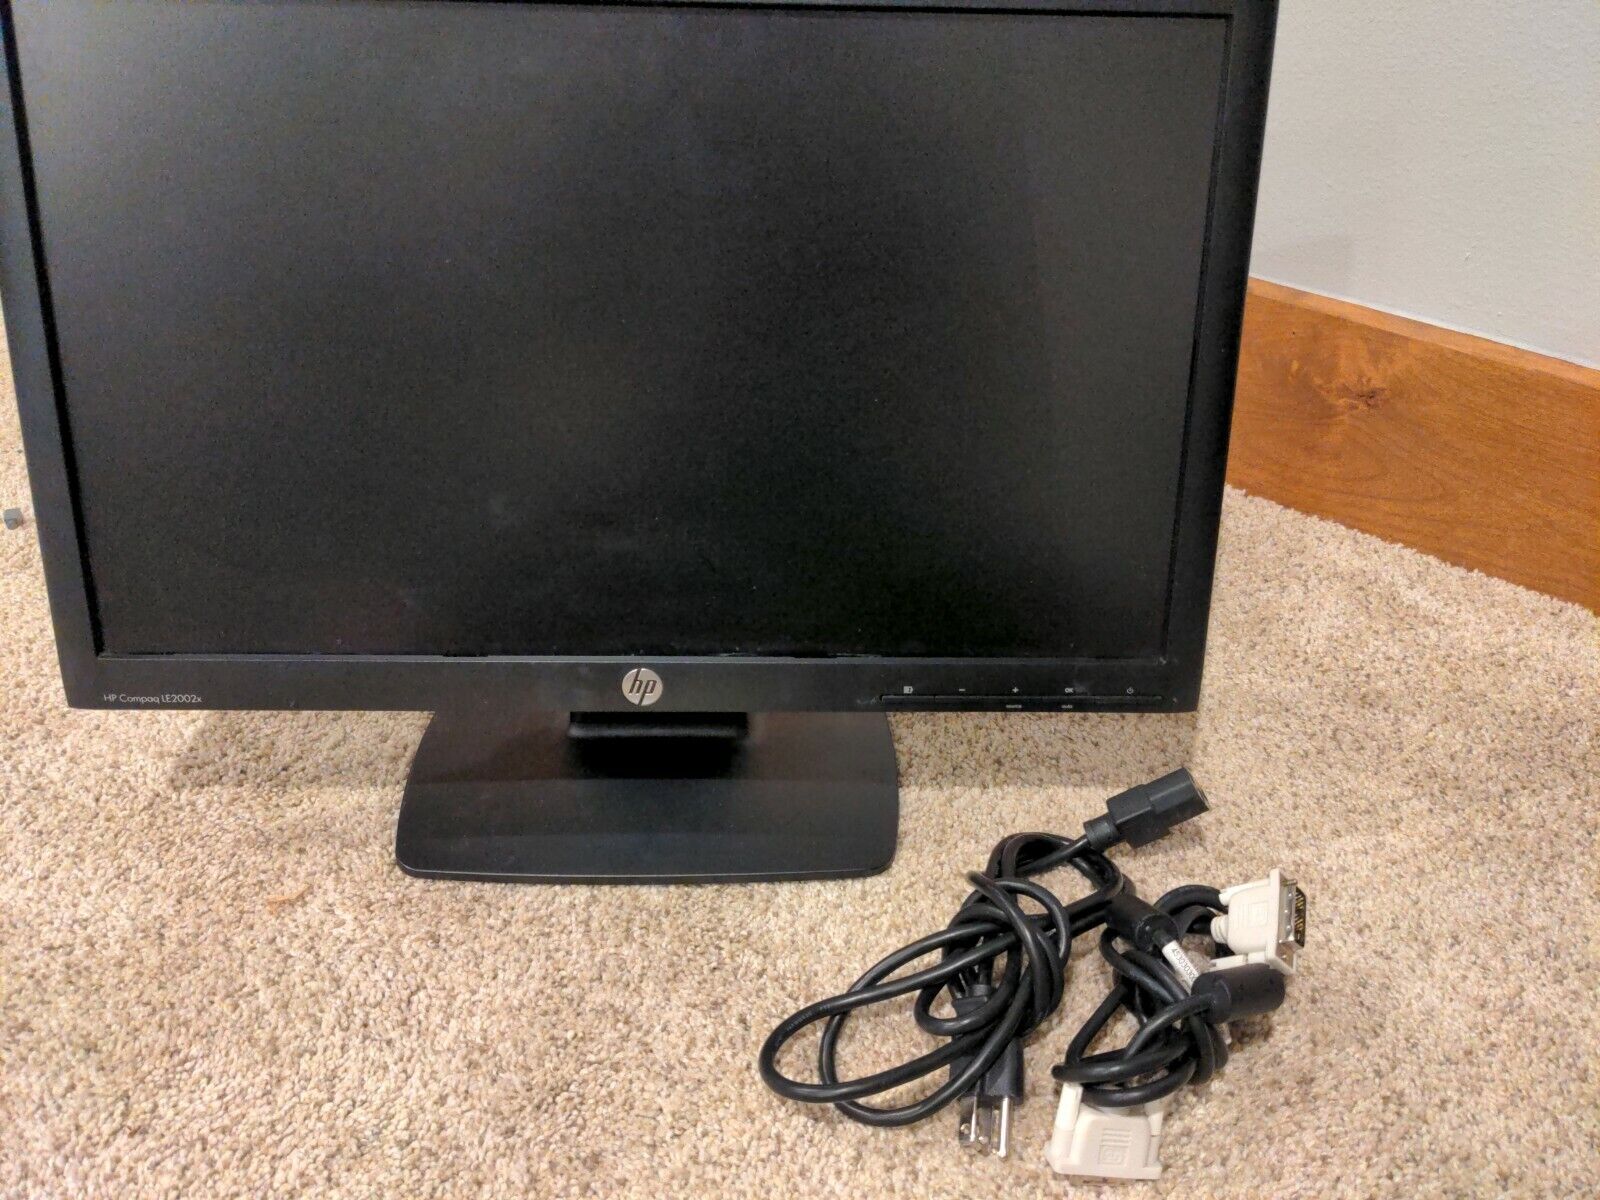 HP Compaq LE2002x Monitor With Power & Connection Cables.